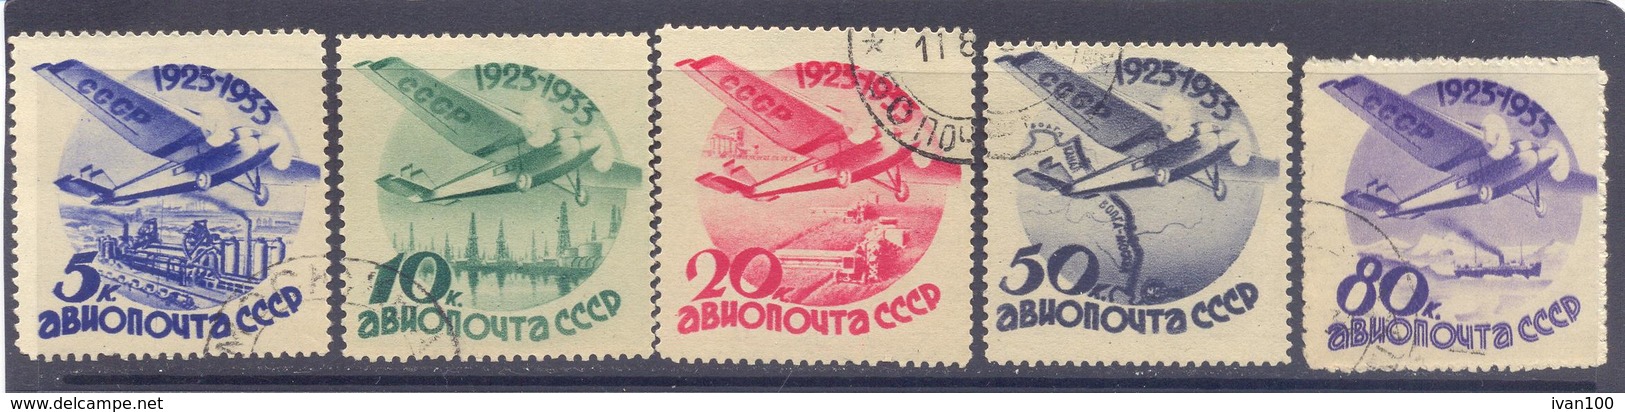 1934. USSR/Russia, 10th Anniv. Of Soviet Civil Aviation And USSR Air-mail Service, Mich.462/66v, Used - Used Stamps